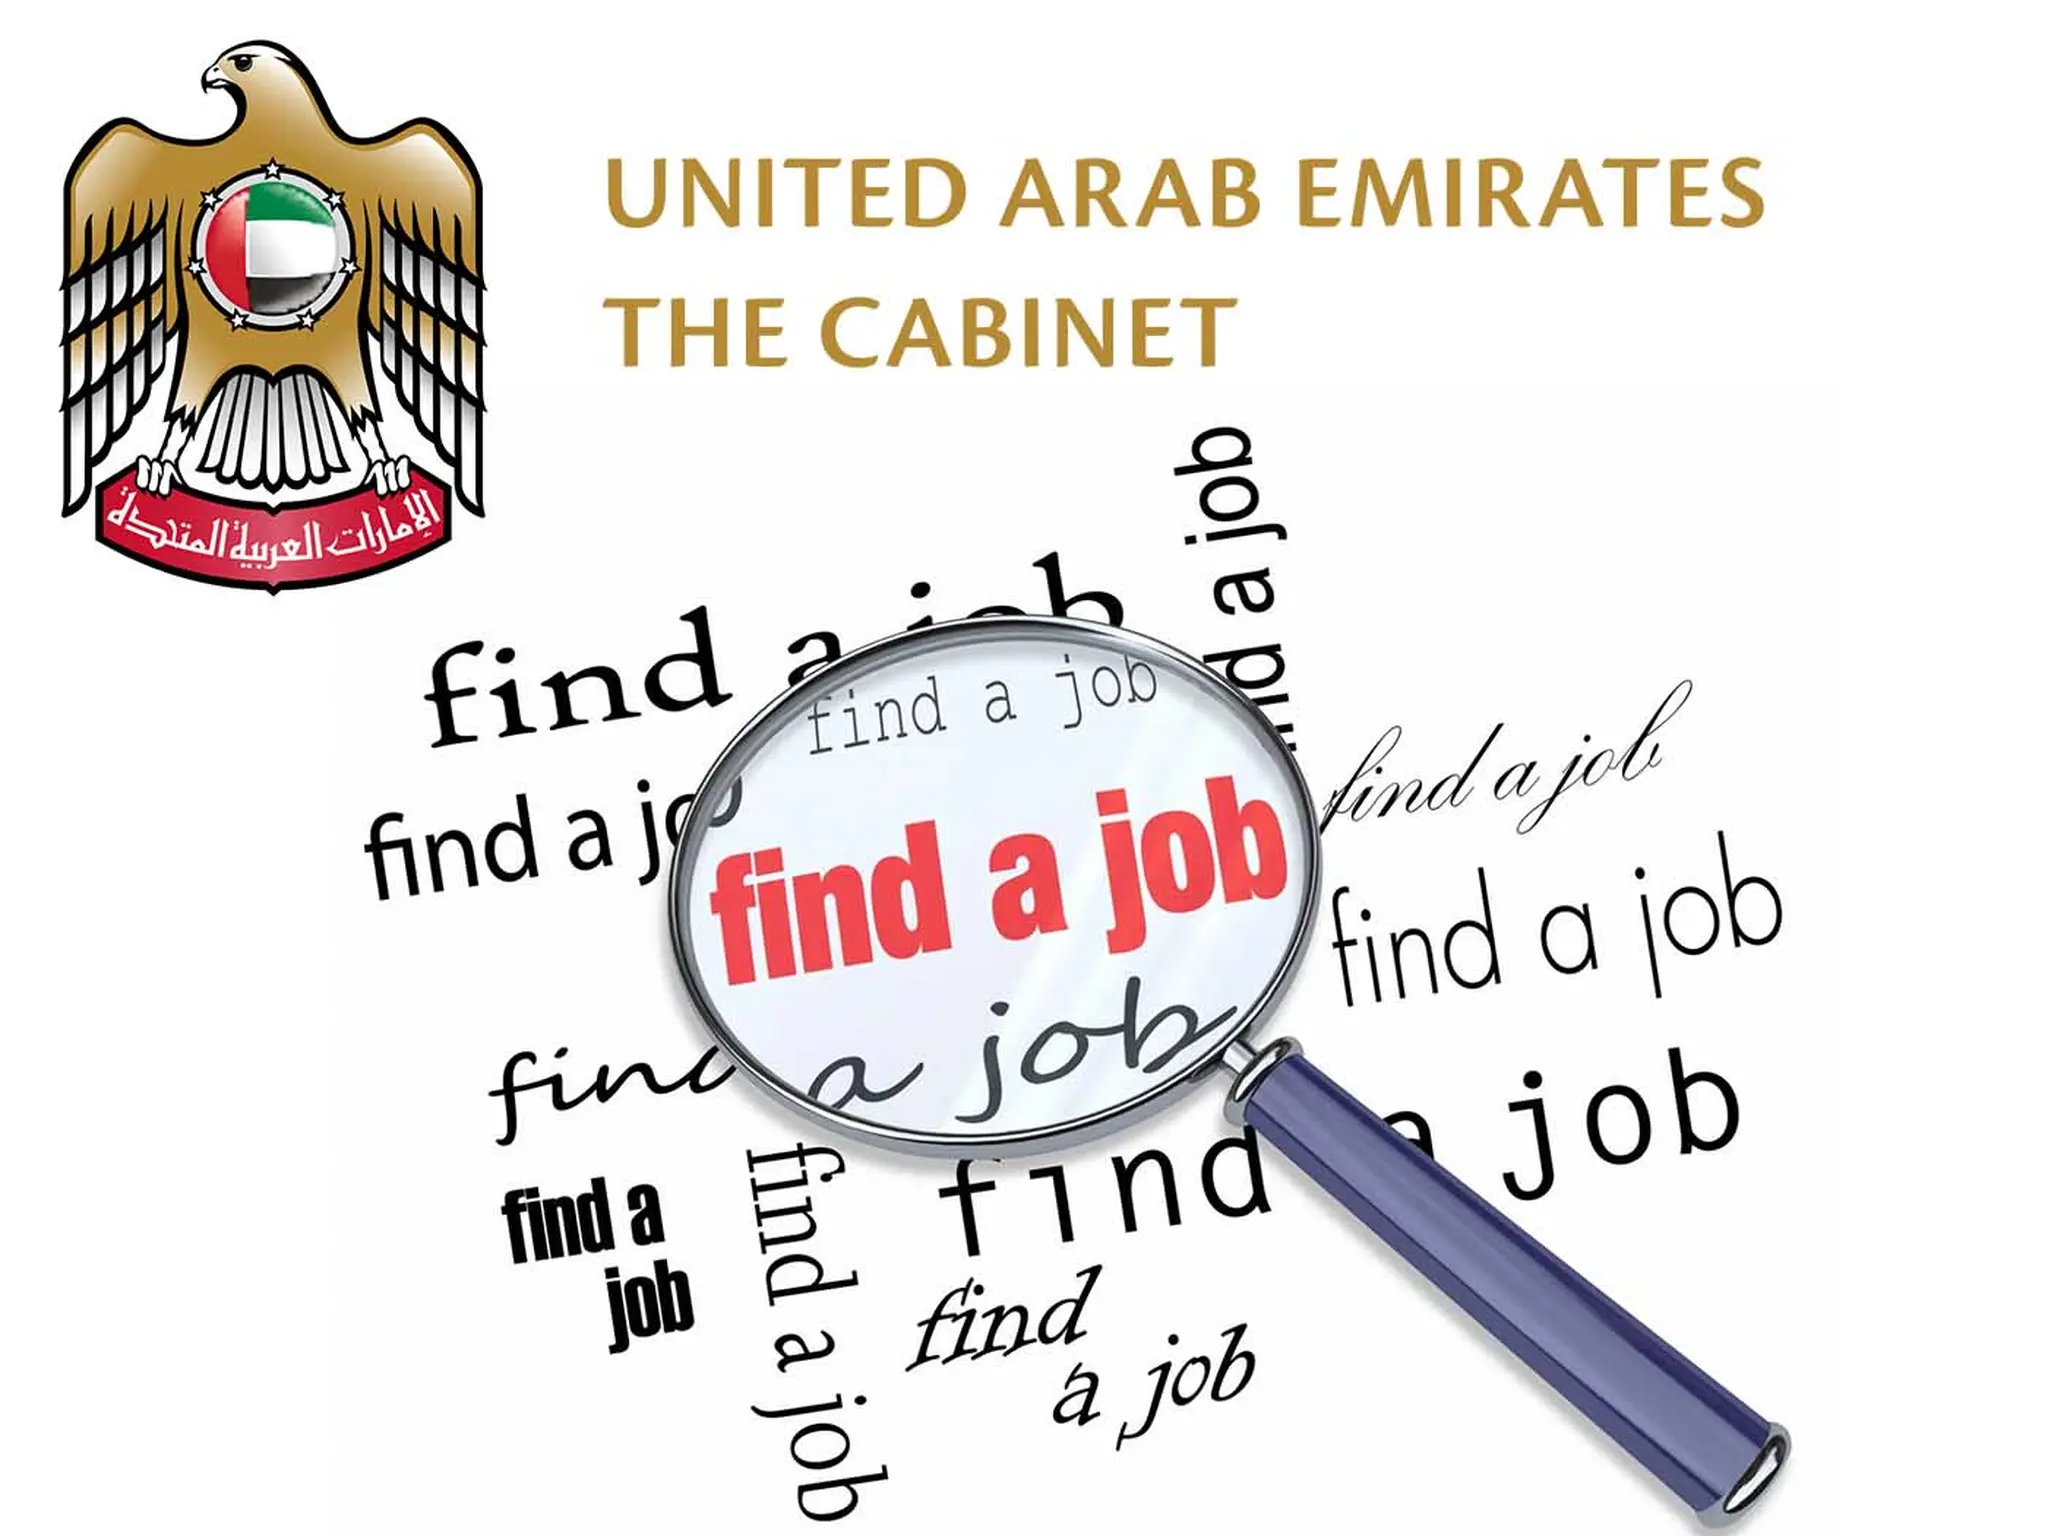 These jobs are available in the UAE Not need an academic degree